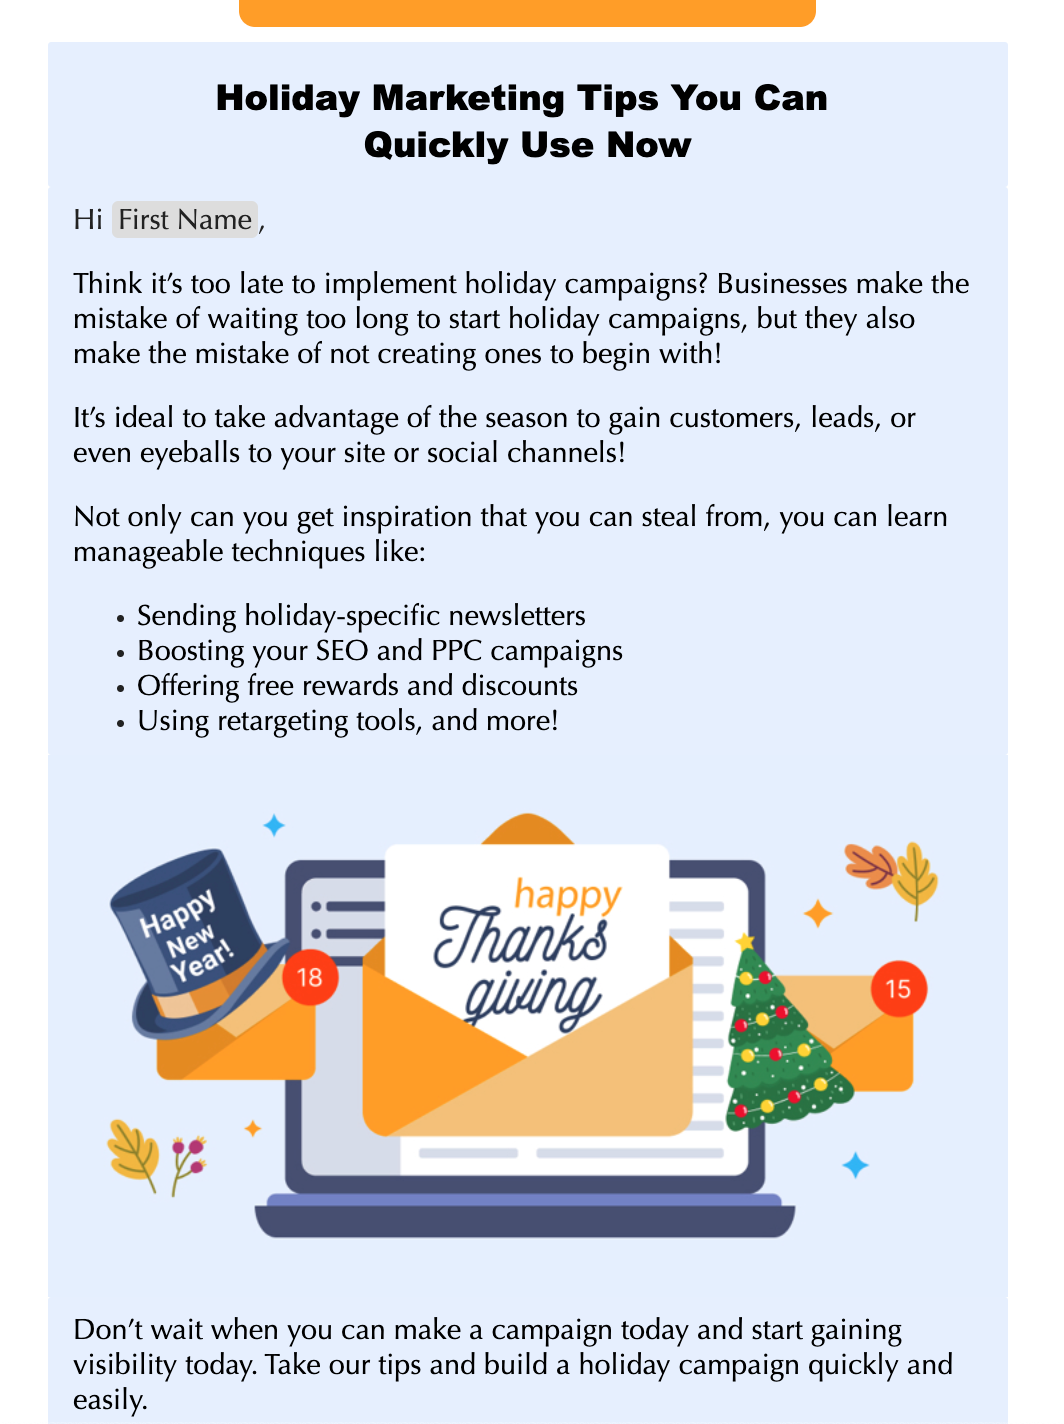 Holiday newsletter